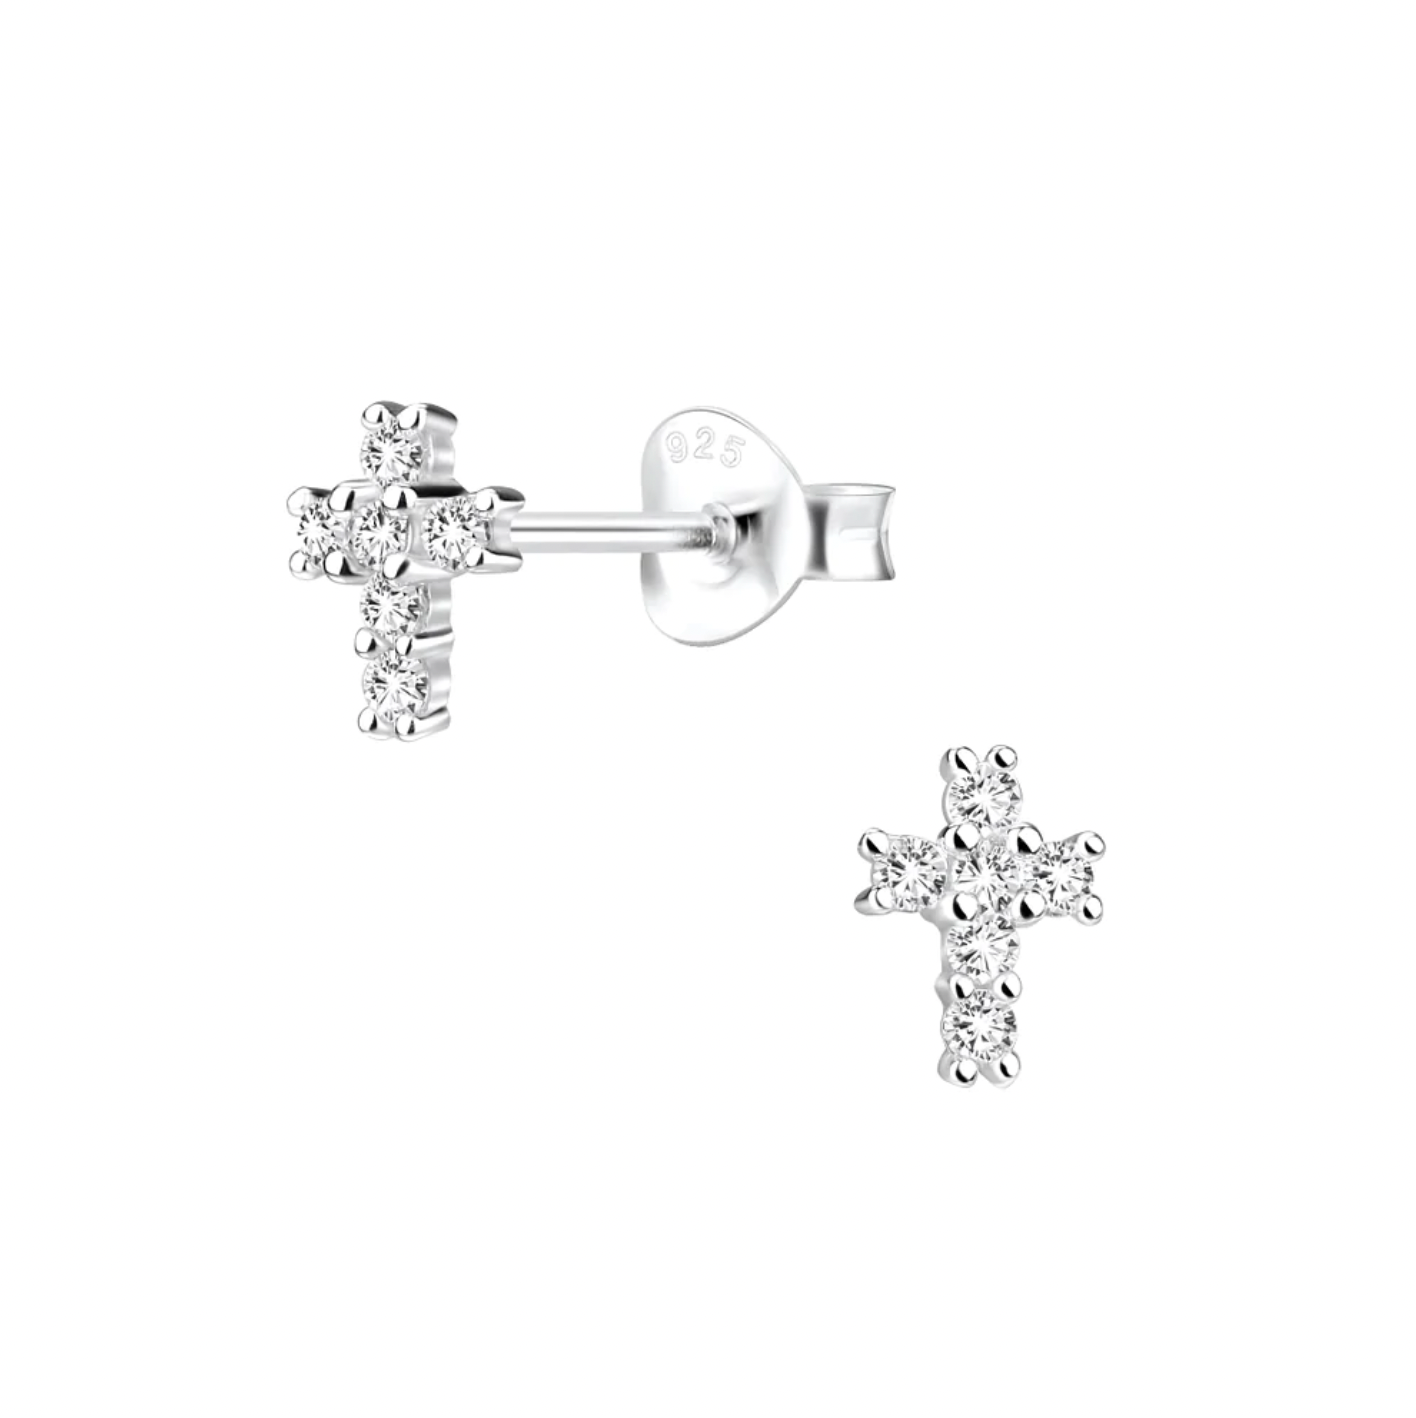 The Lucy Nash Bethany Studs have become a top seller.